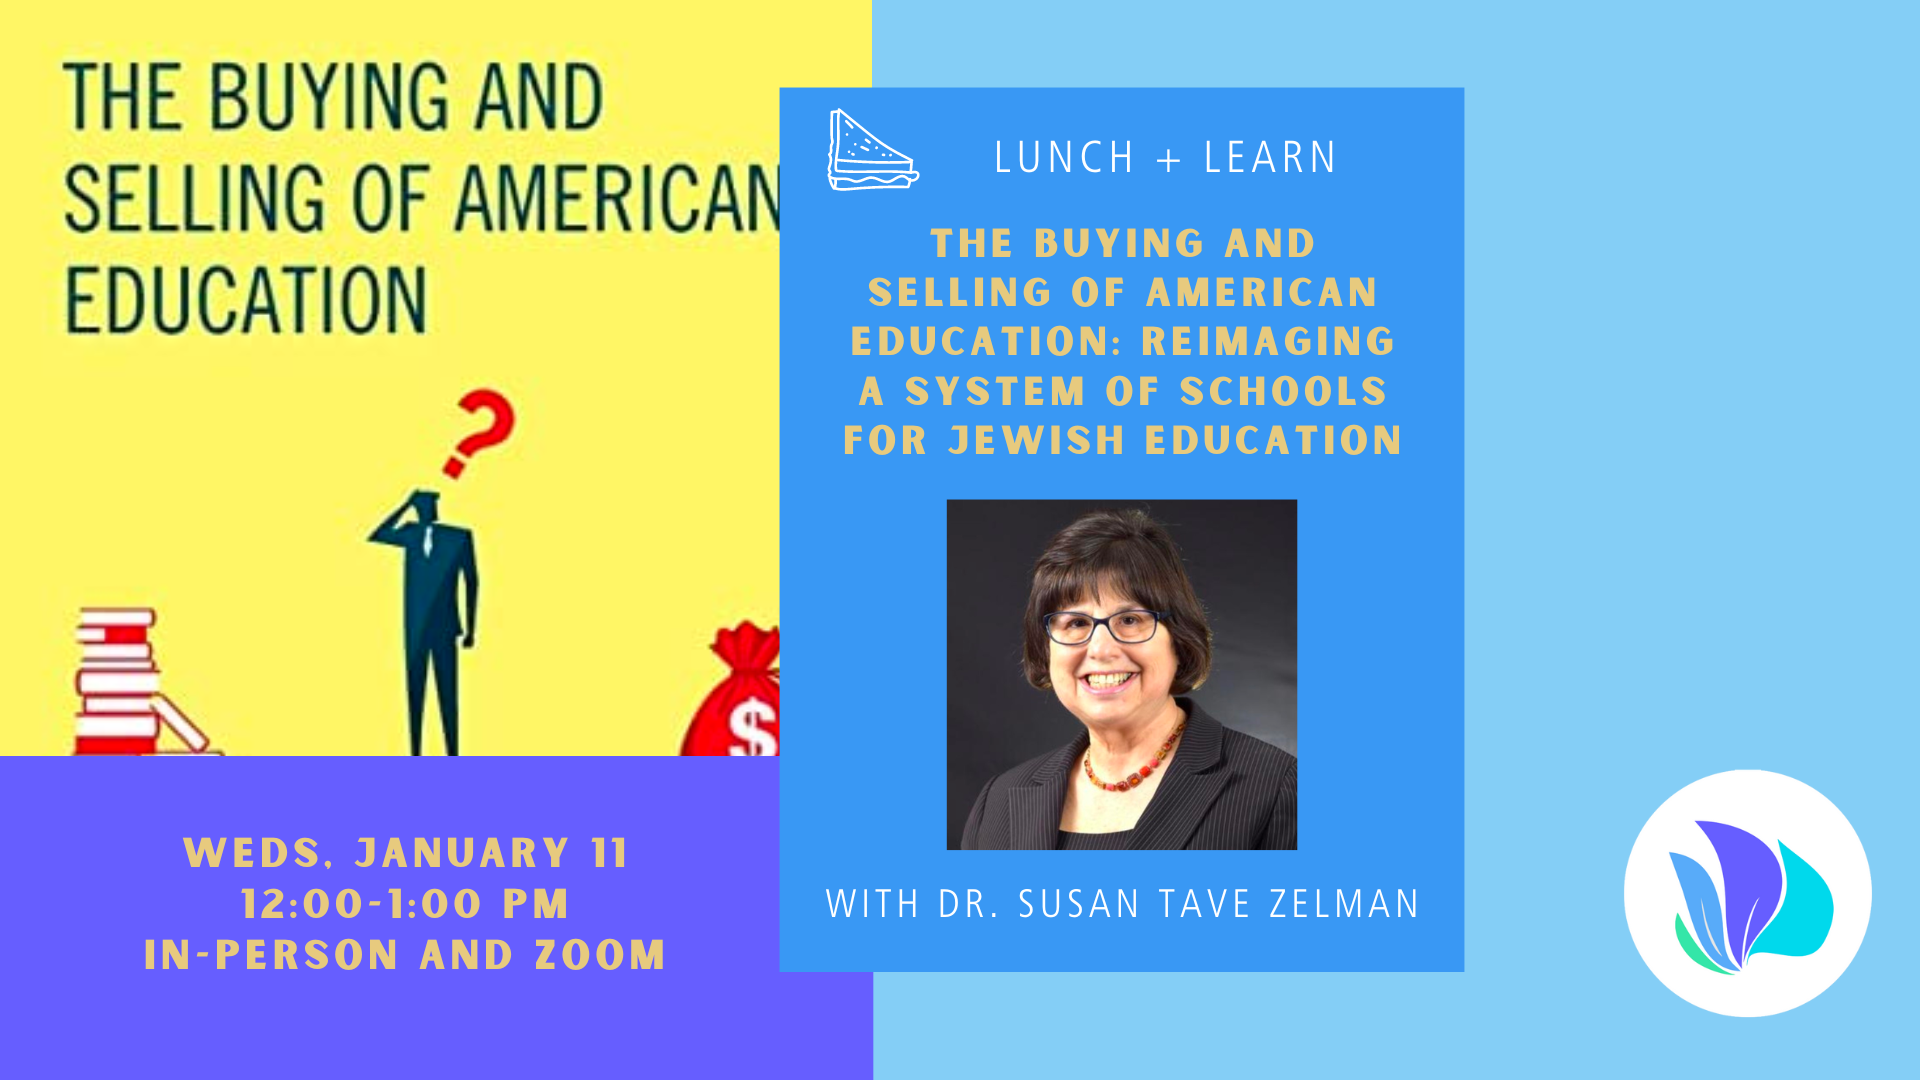 Lunch & Learn: The Buying and Selling of American Education - Reimaging a System of Schools for Jewish Education with Dr. Susan Tave Zelman